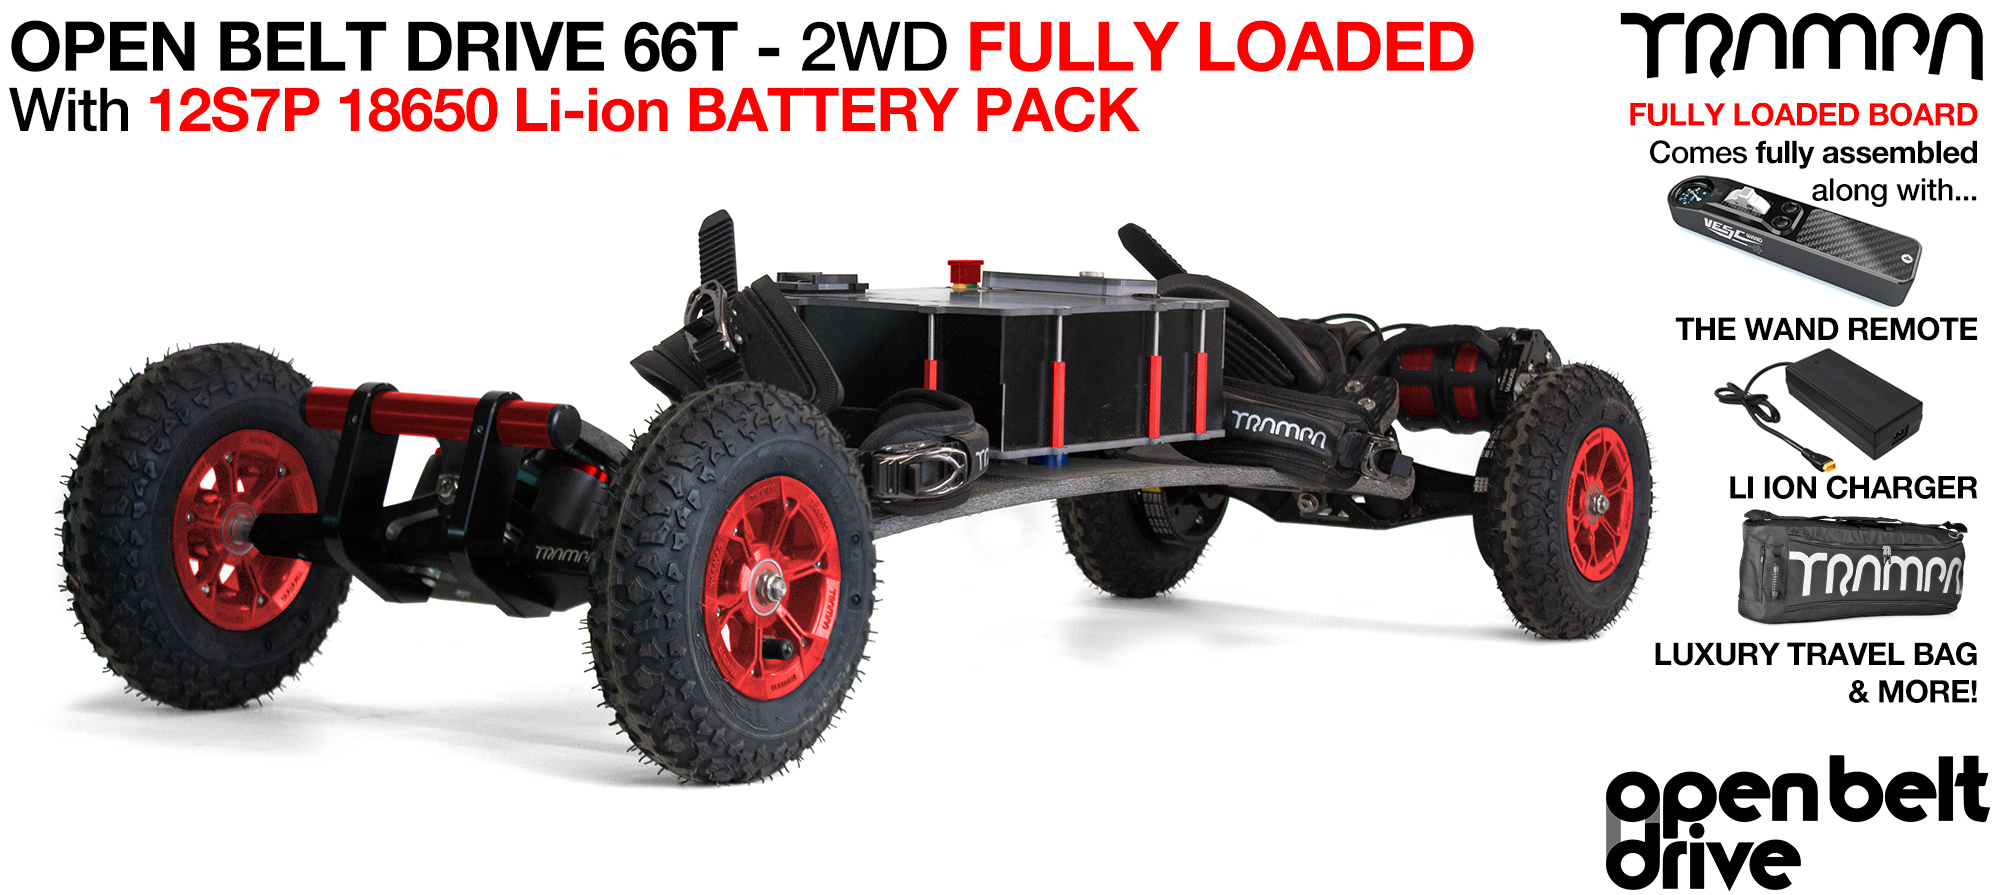 66T OPEN BELT DRIVE TRAMPA Electric Mountainboard with 8 Inch Wheels & 66 Tooth Pulleys